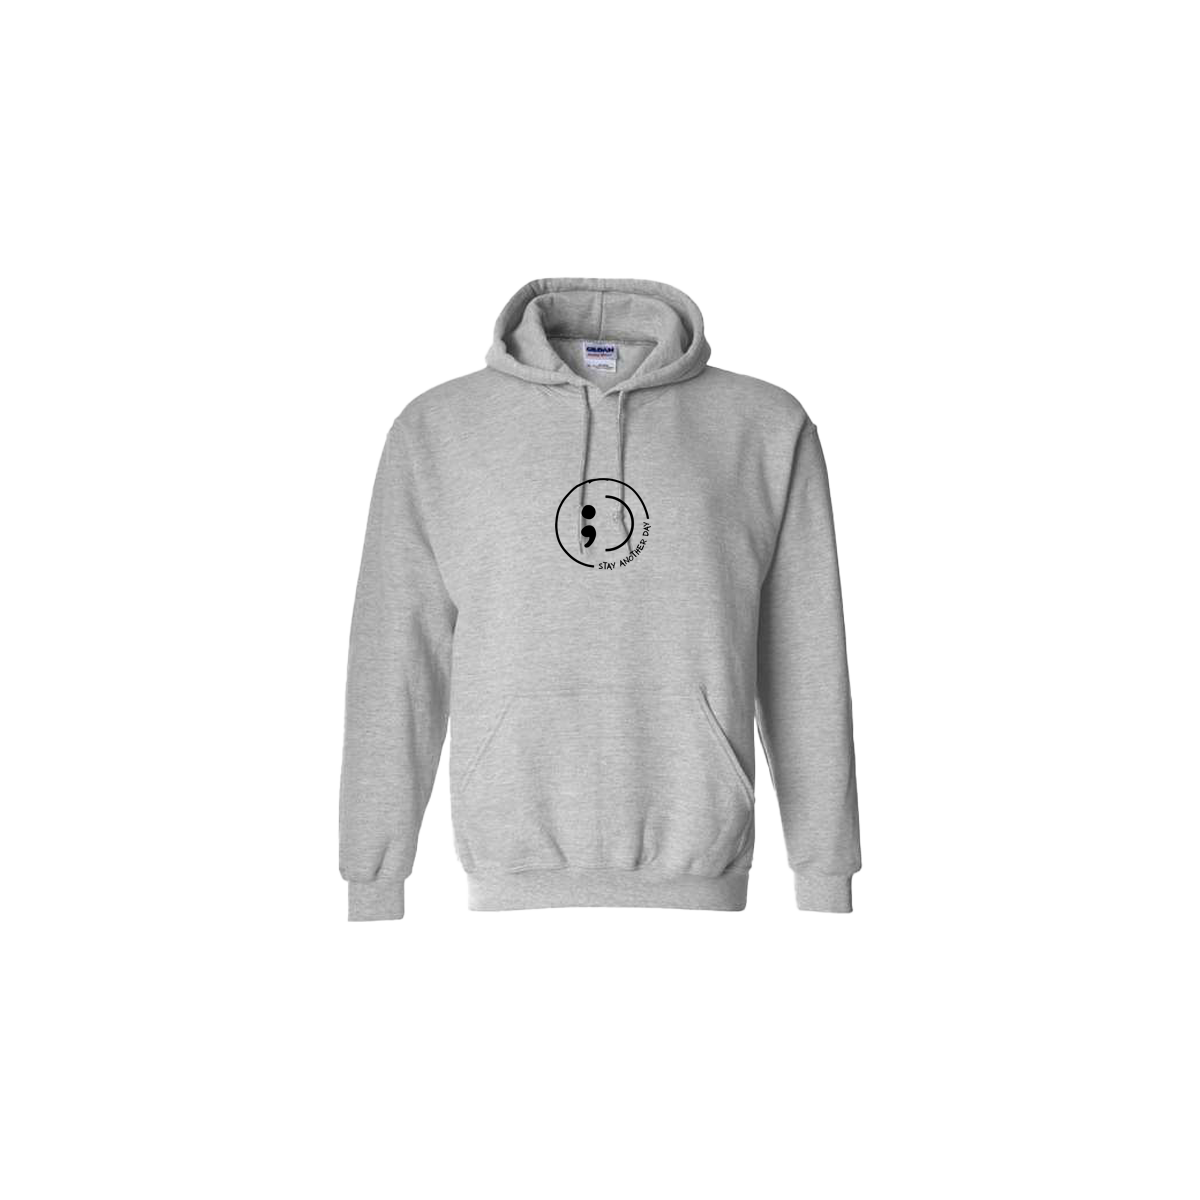 Stay Another Day Smiley with text Embroidered Grey Hoodie - Mental Health Awareness Clothing